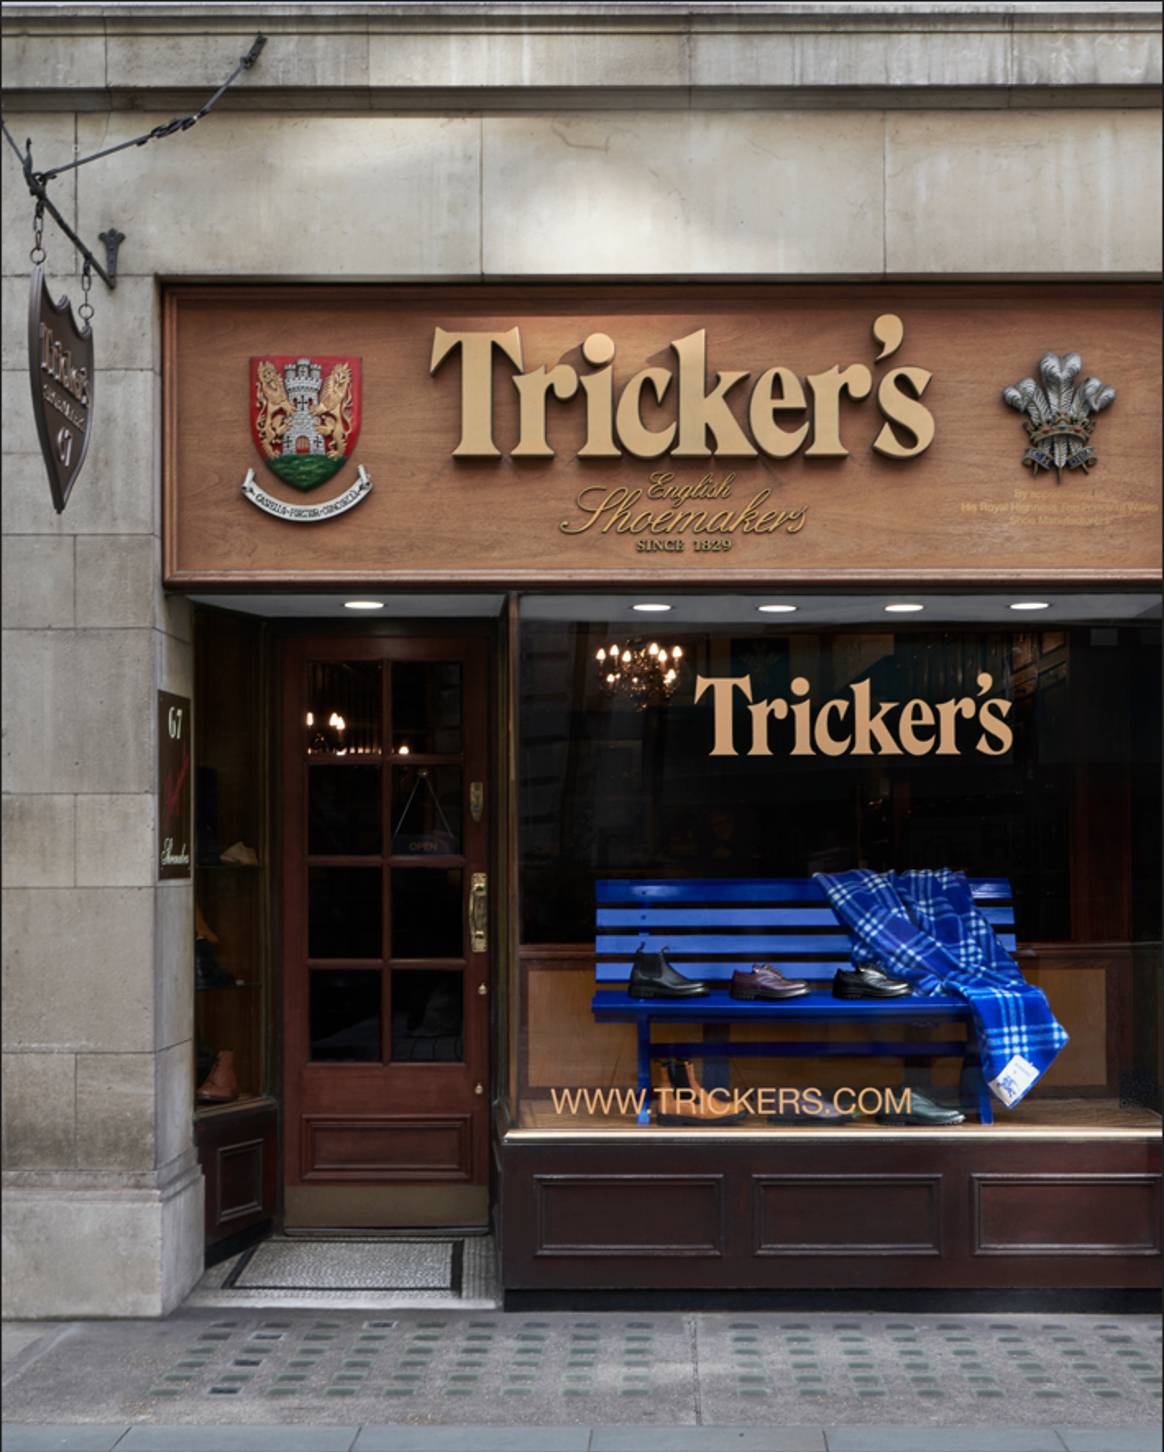 Burberry window takeover at Tricker’s